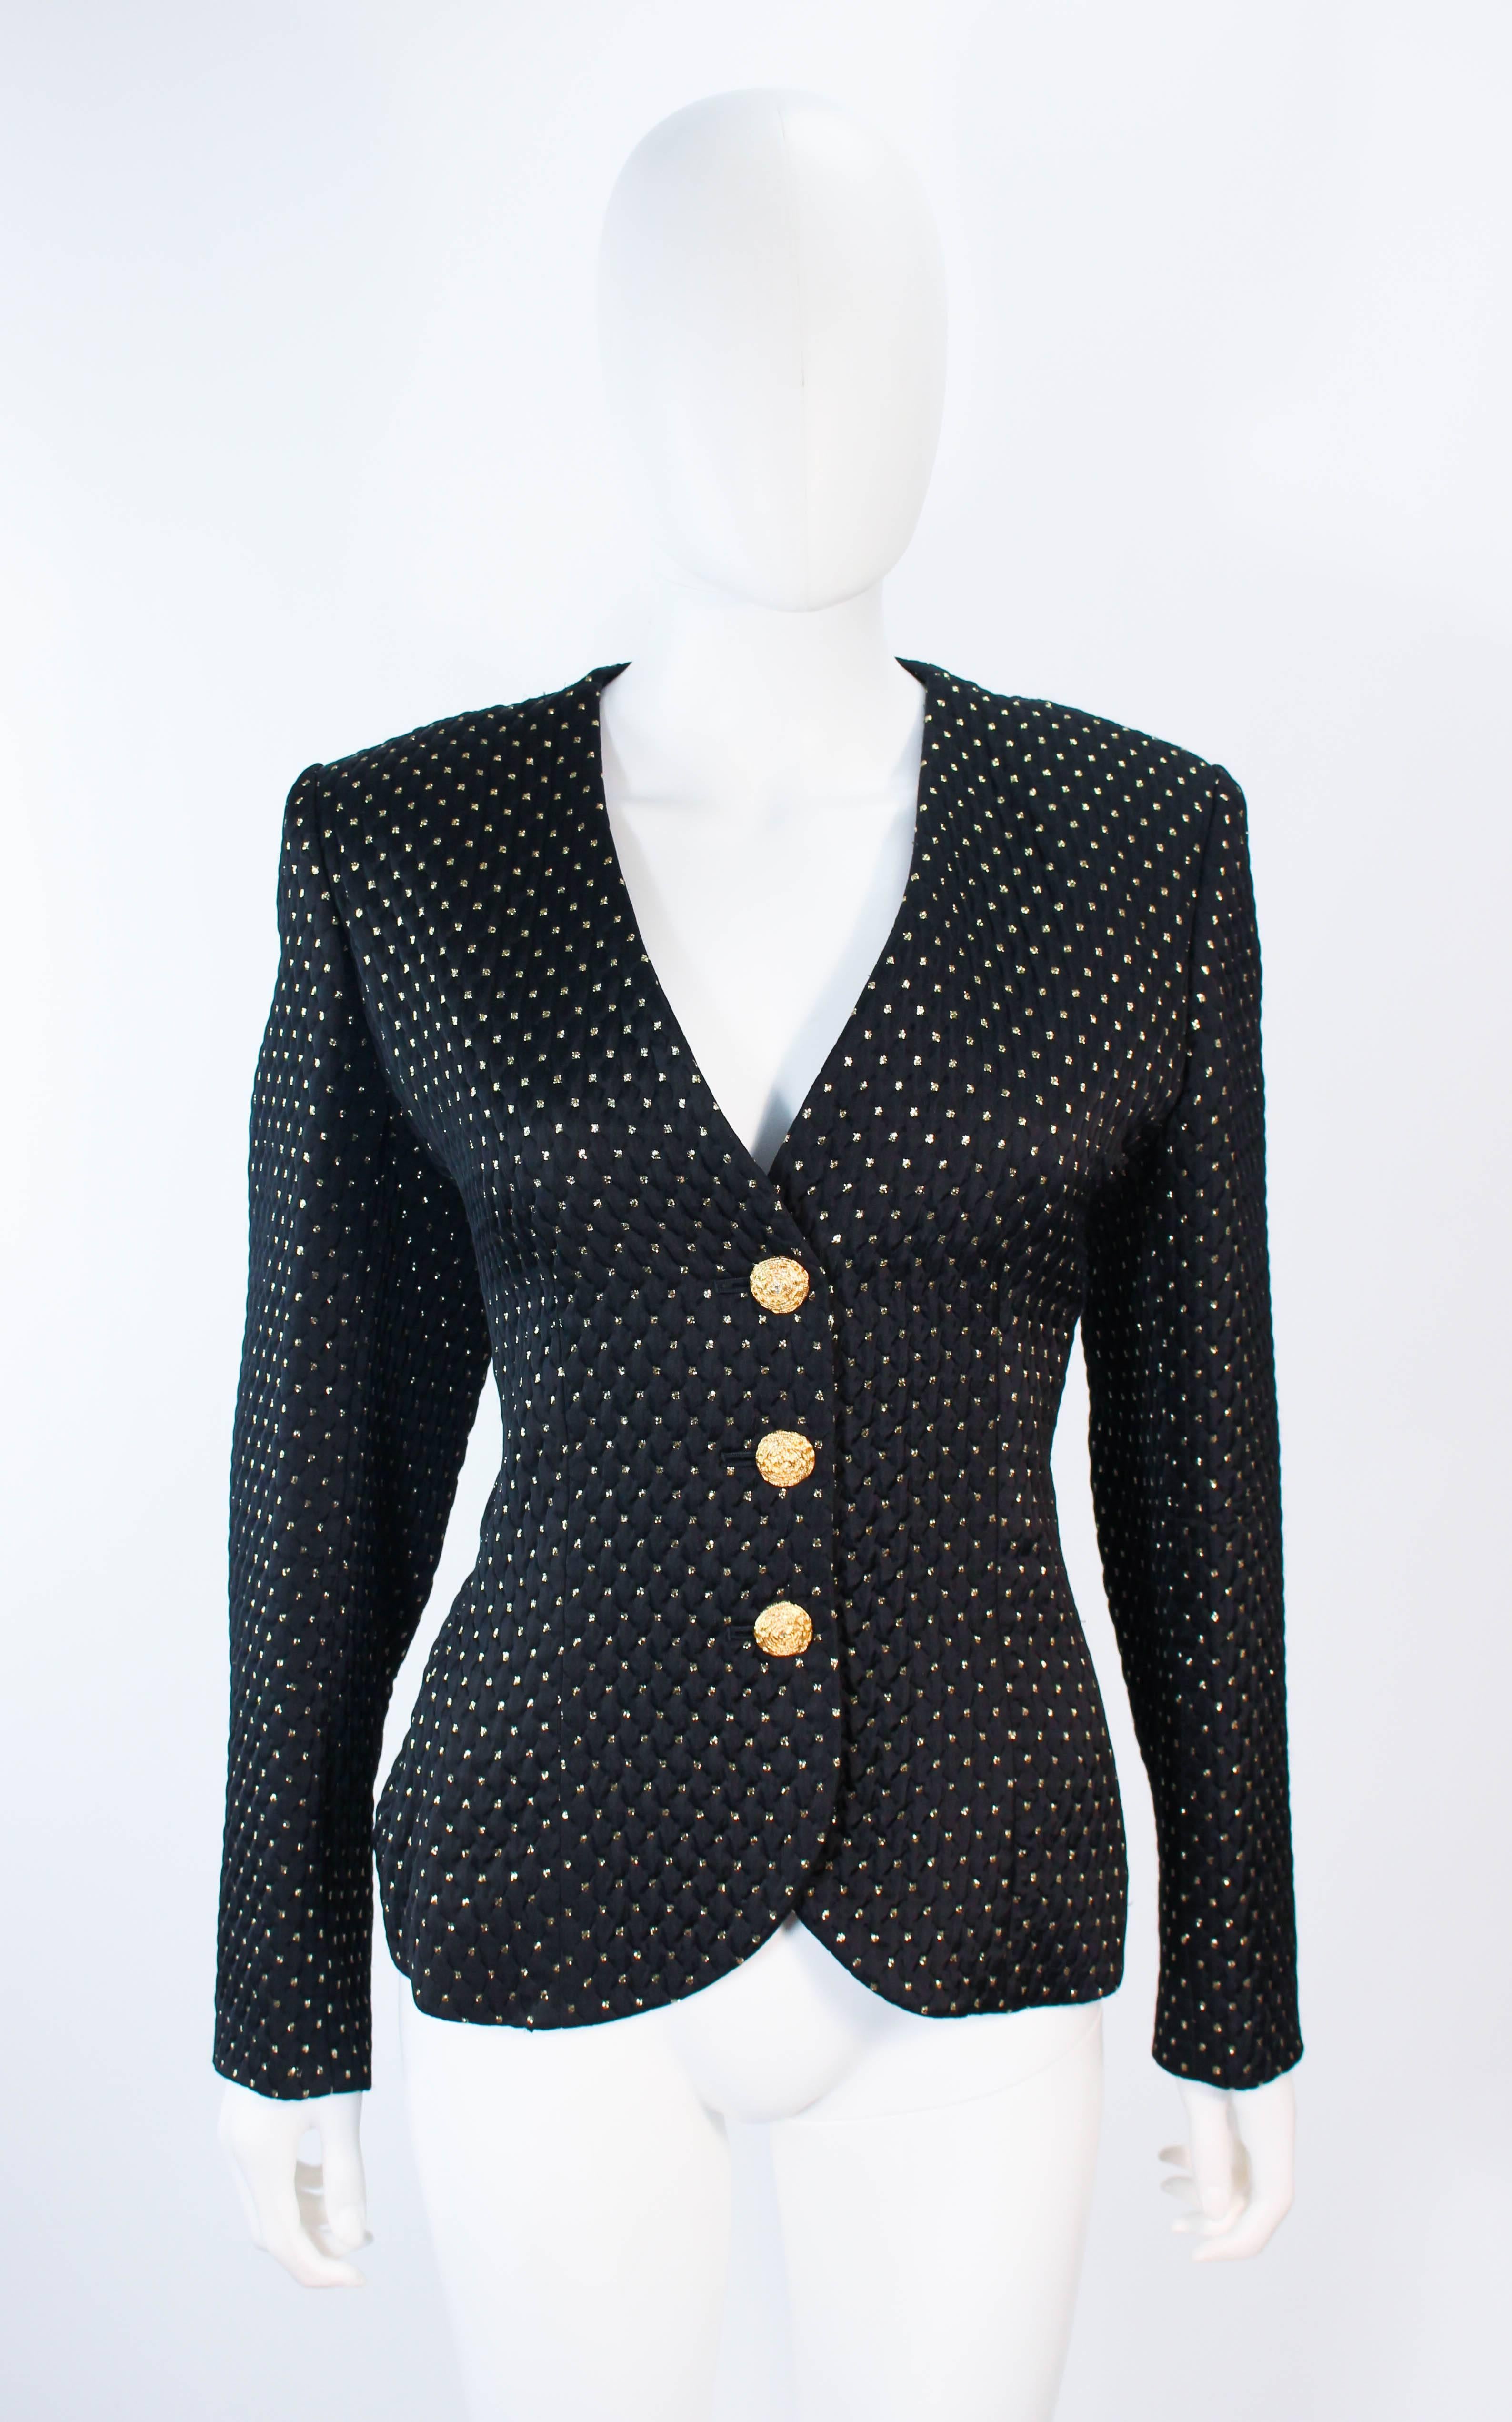 This Yves Saint Laurent jacket is composed of a black fabric with gold metallic accenting. There are center front button closures. In excellent vintage condition.

**Please cross-reference measurements for personal accuracy. Size in description box